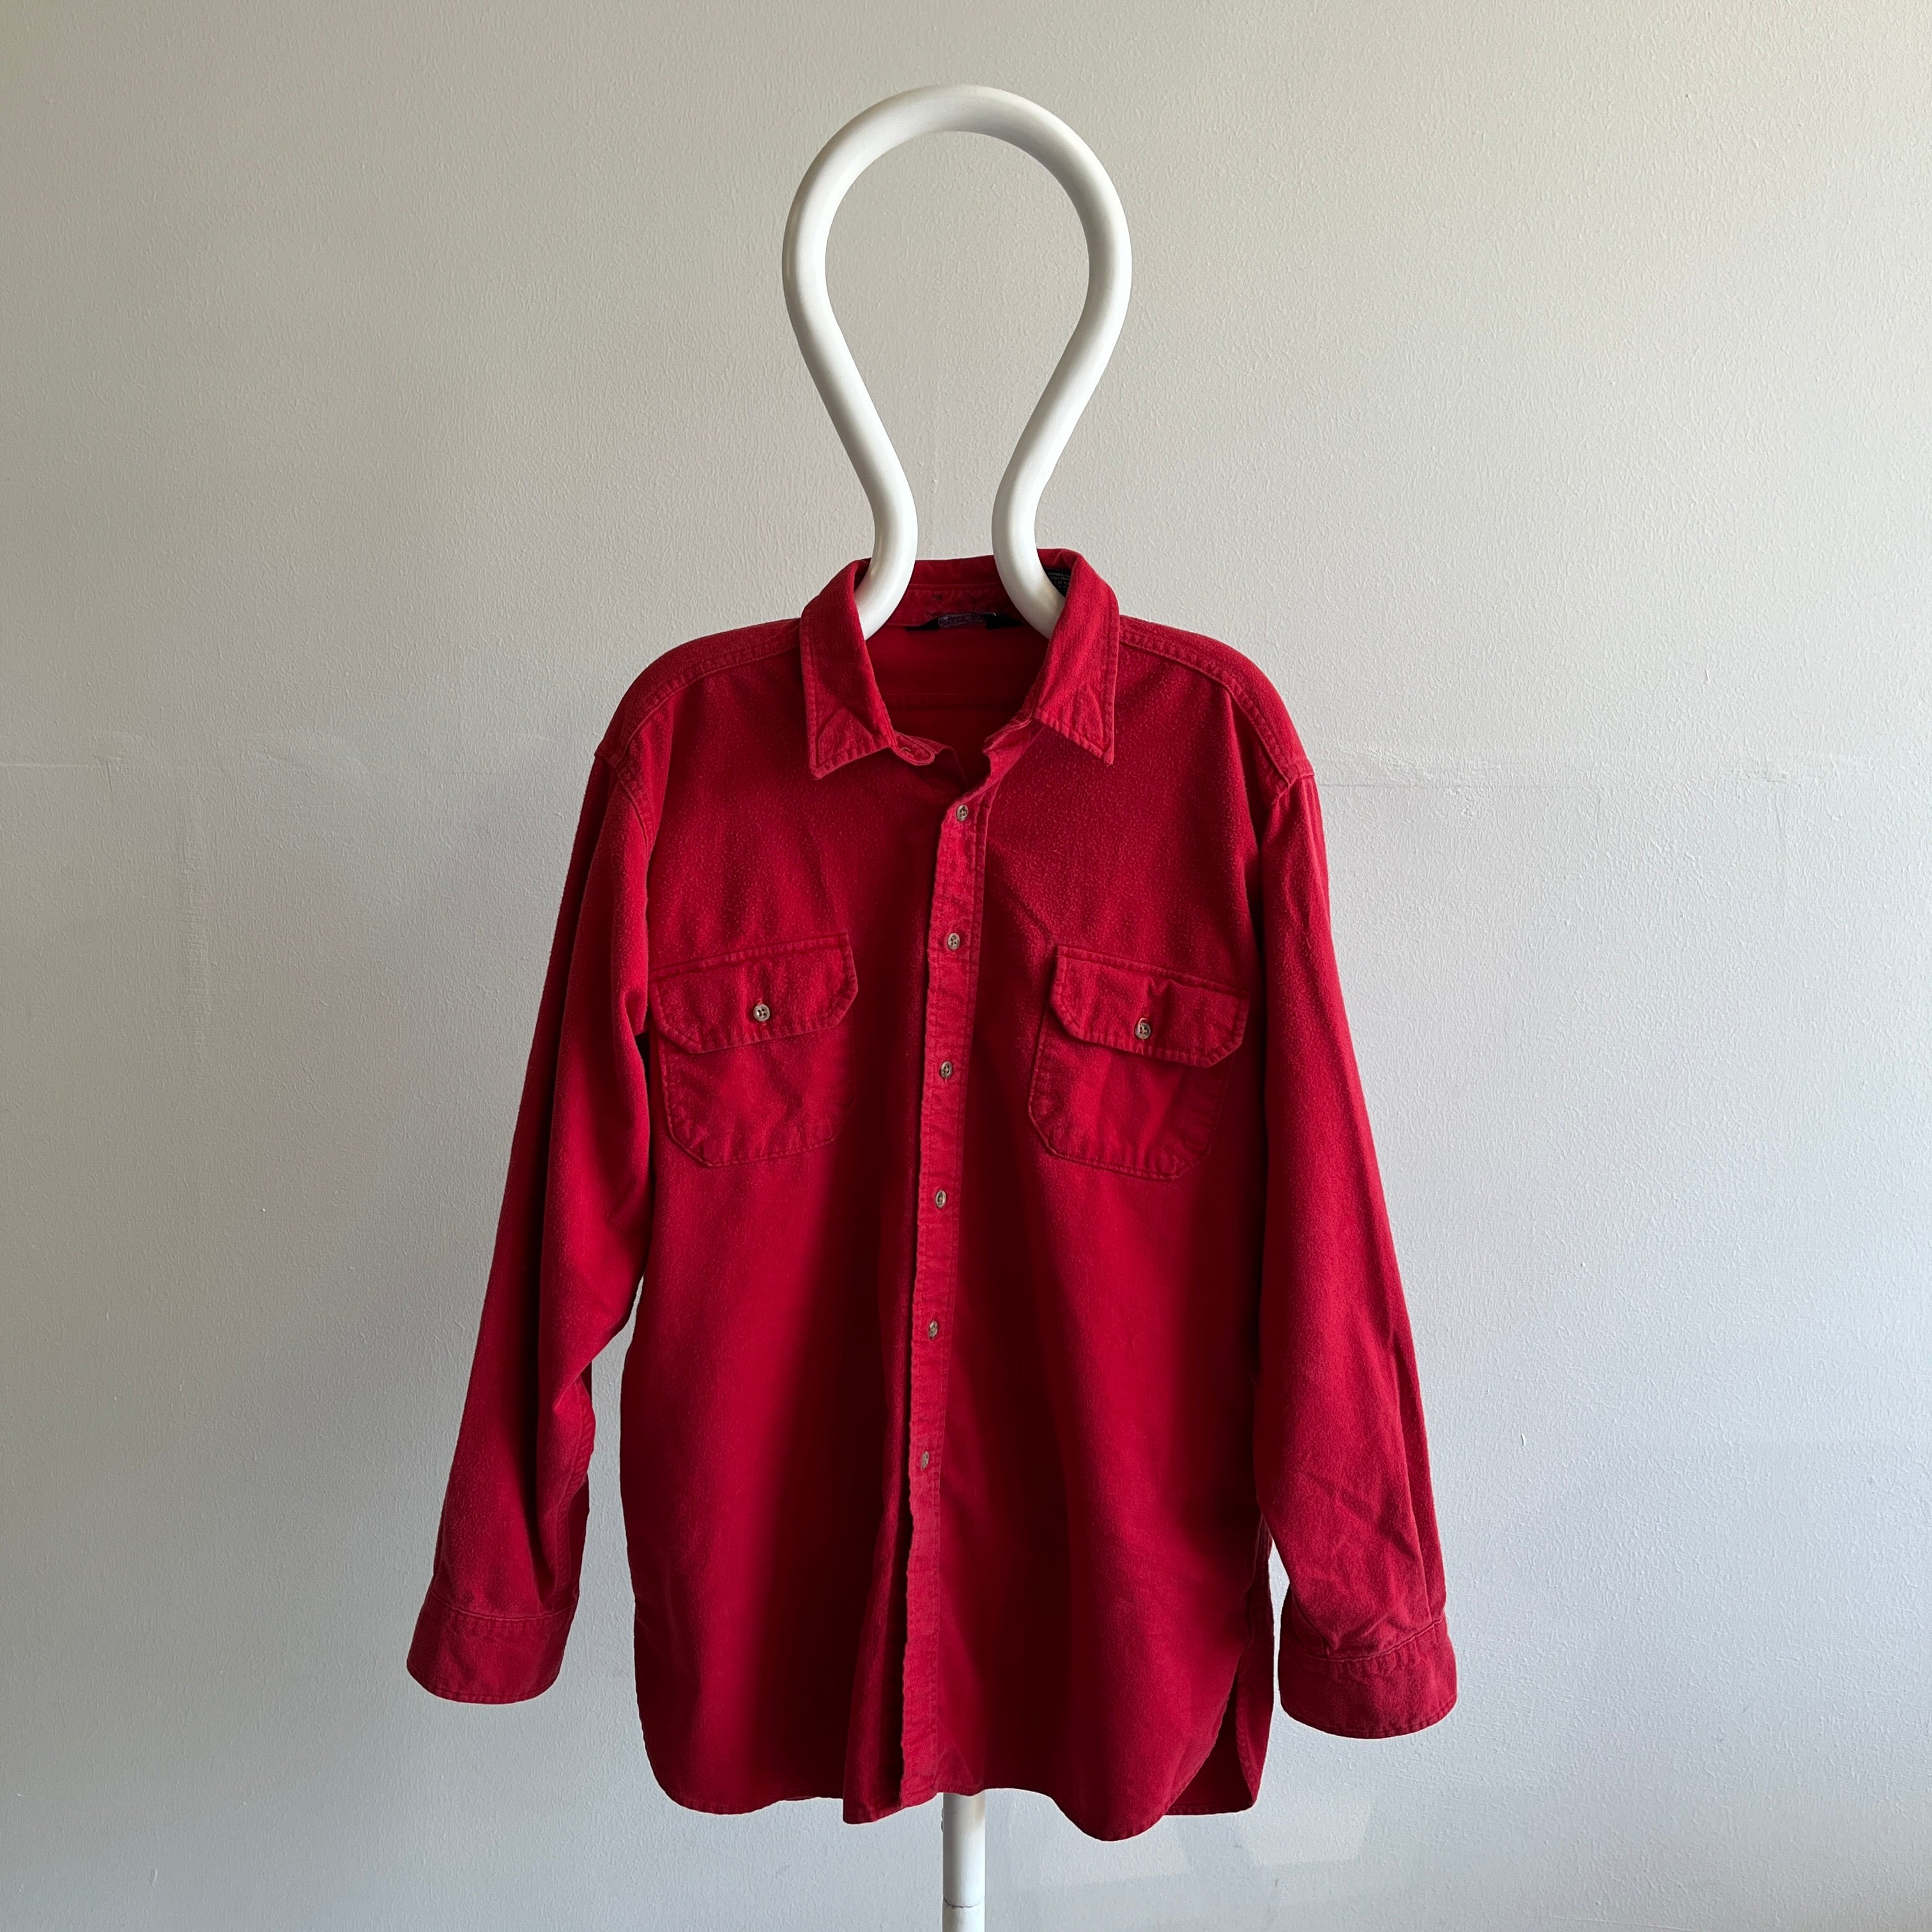 1980s USA MADE Lands' End Soft Cotton Flannel in a Deep Red